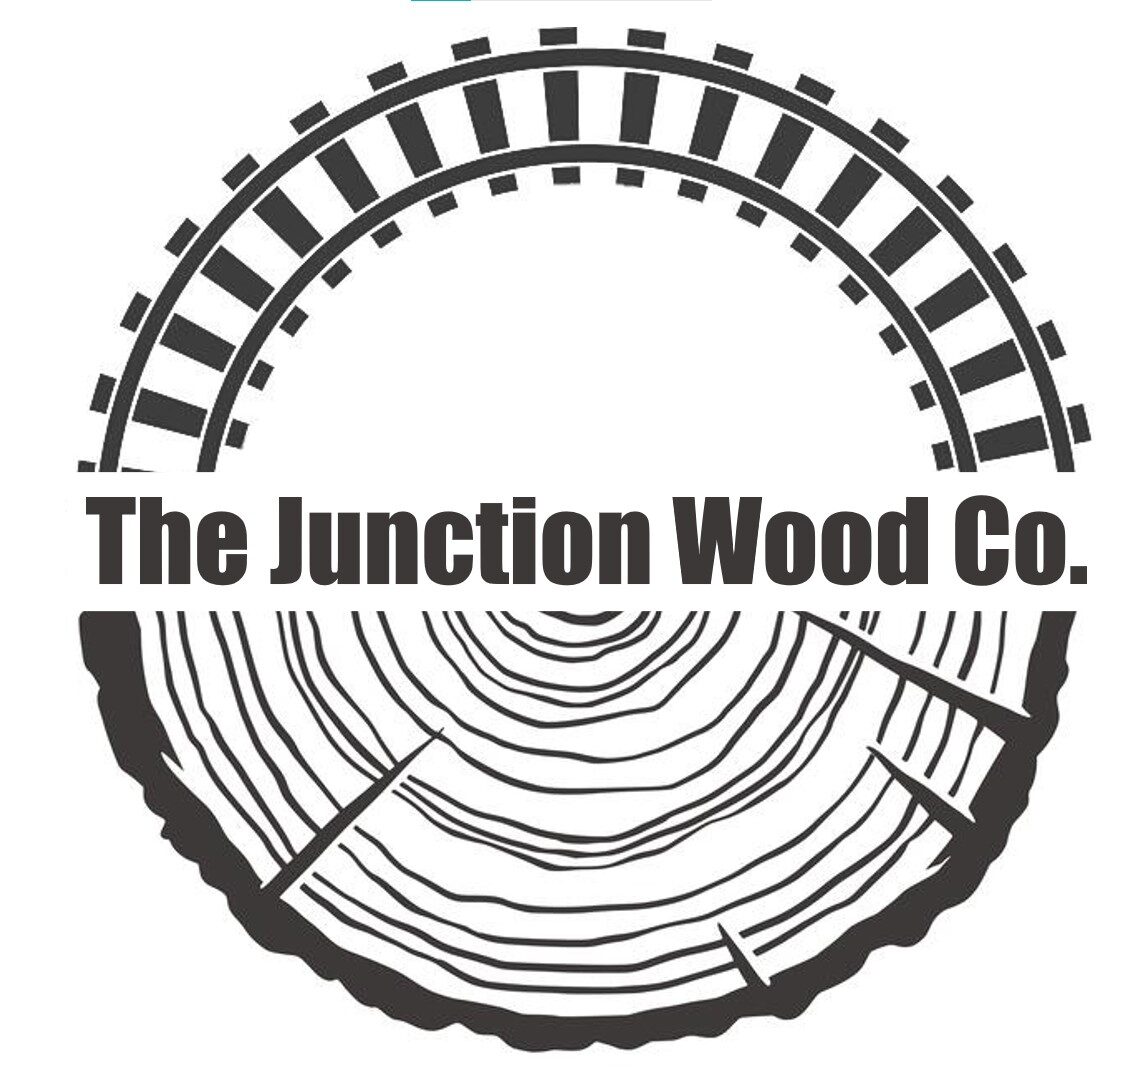 The Junction Wood Co